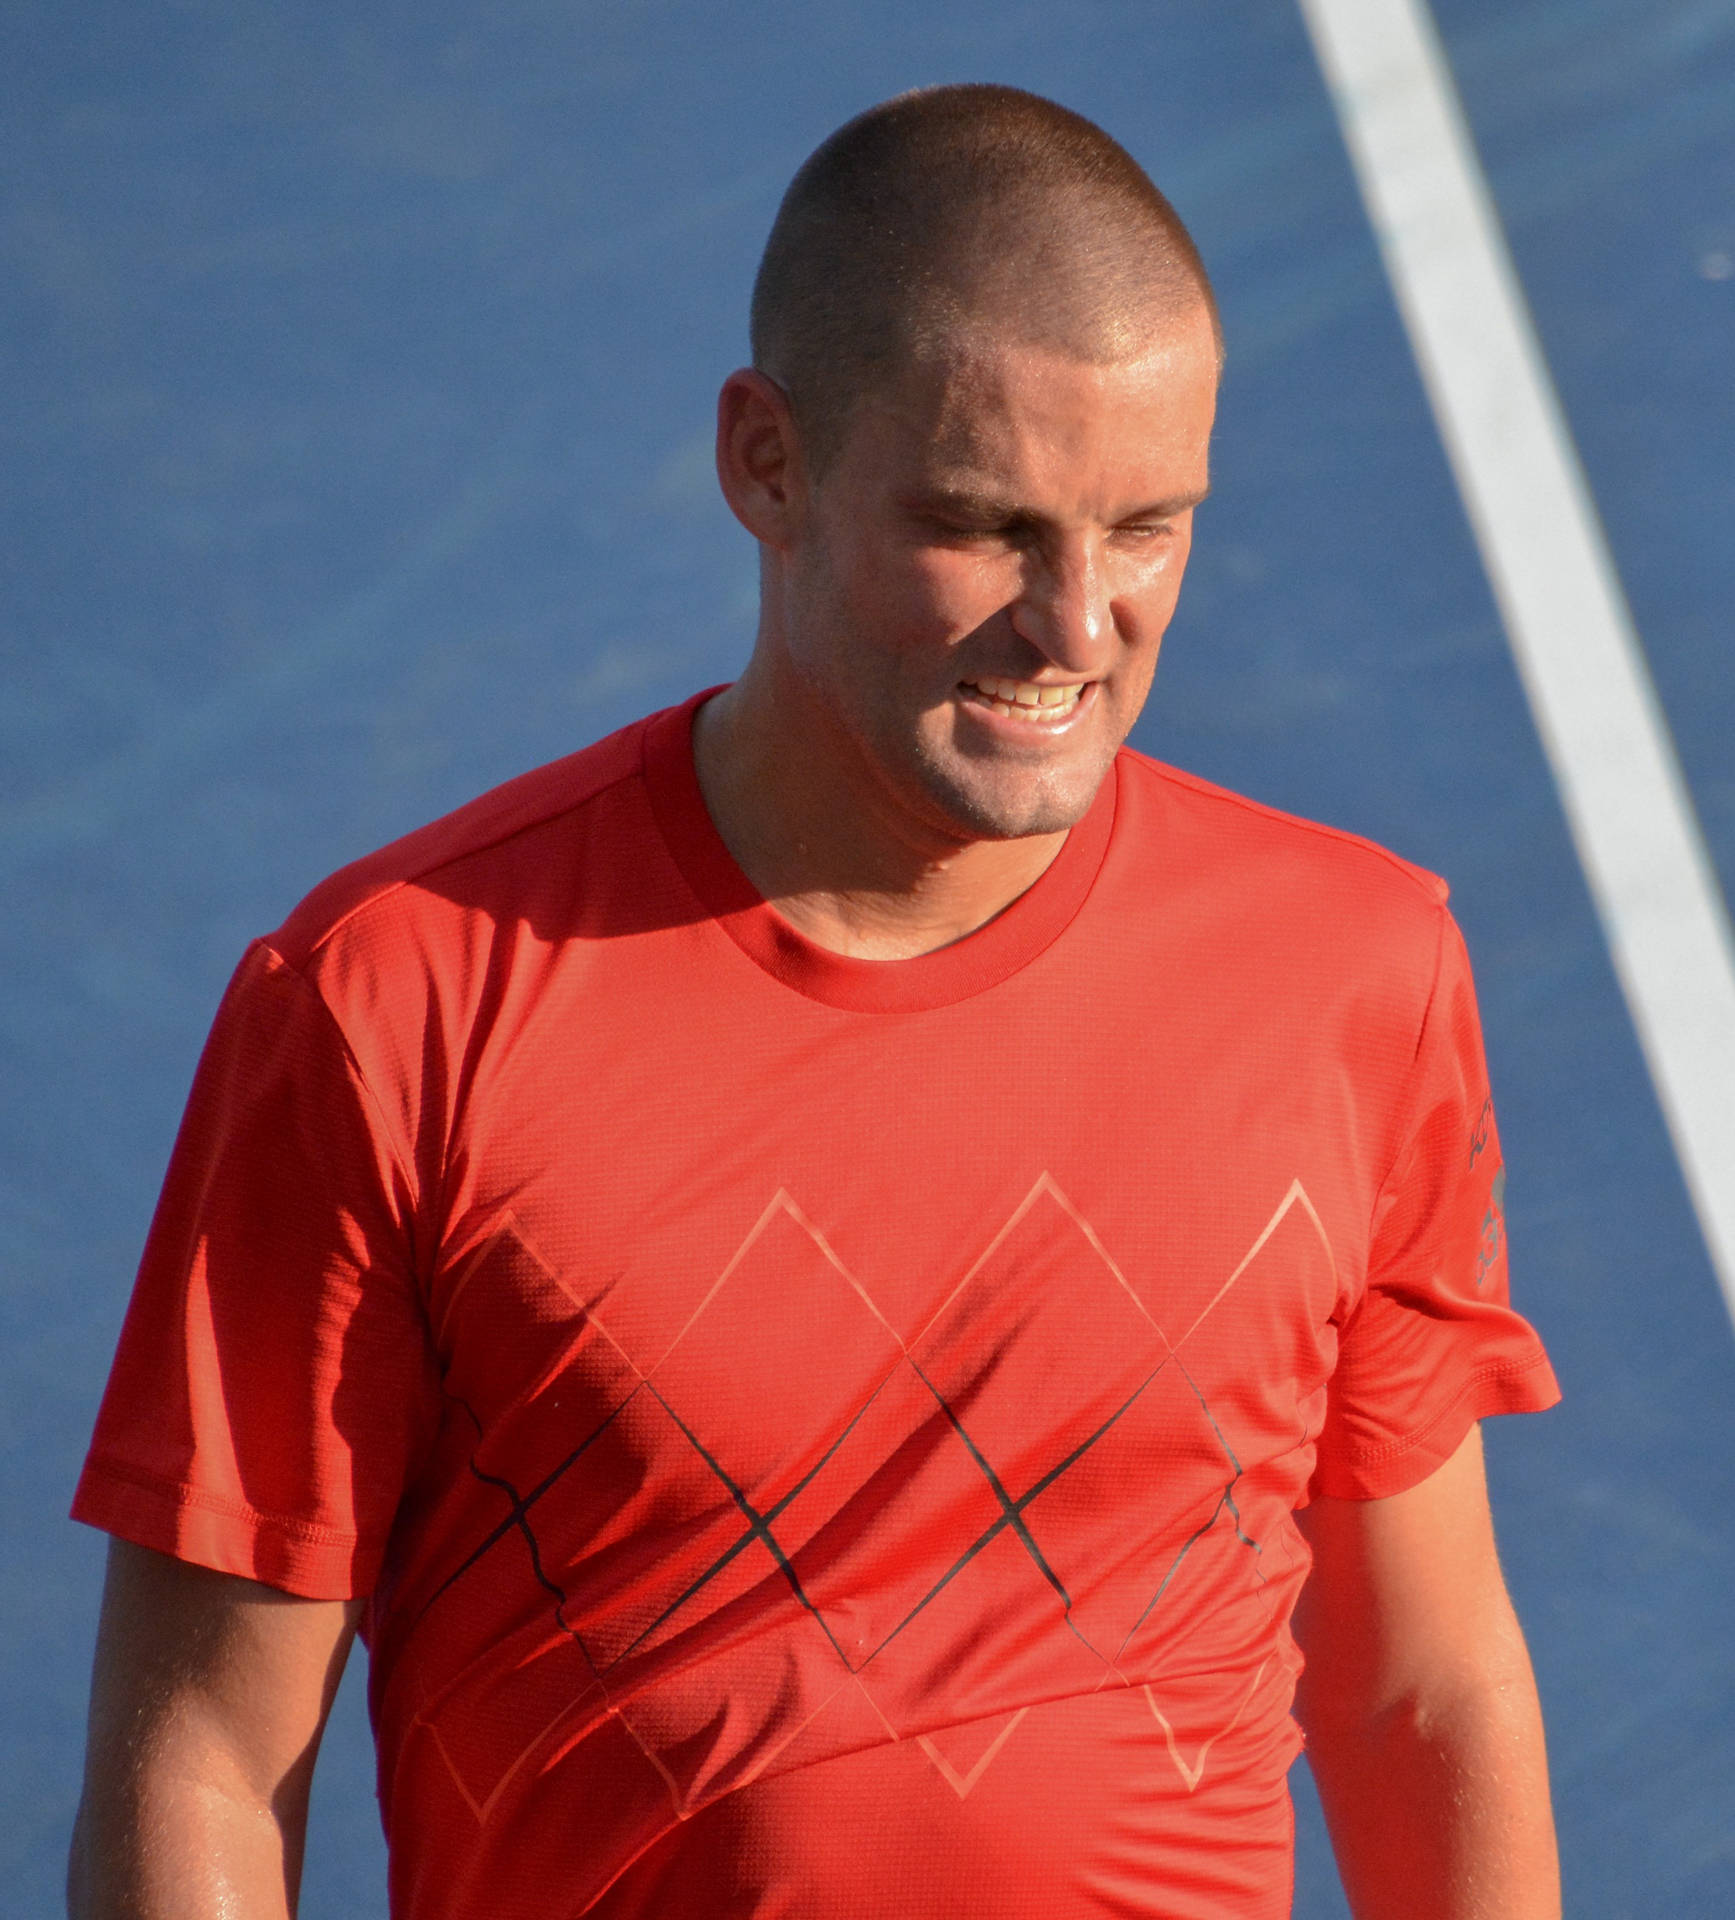 Mikhail Youzhny in Action - The Russian Tennis Maestro in Red Wallpaper